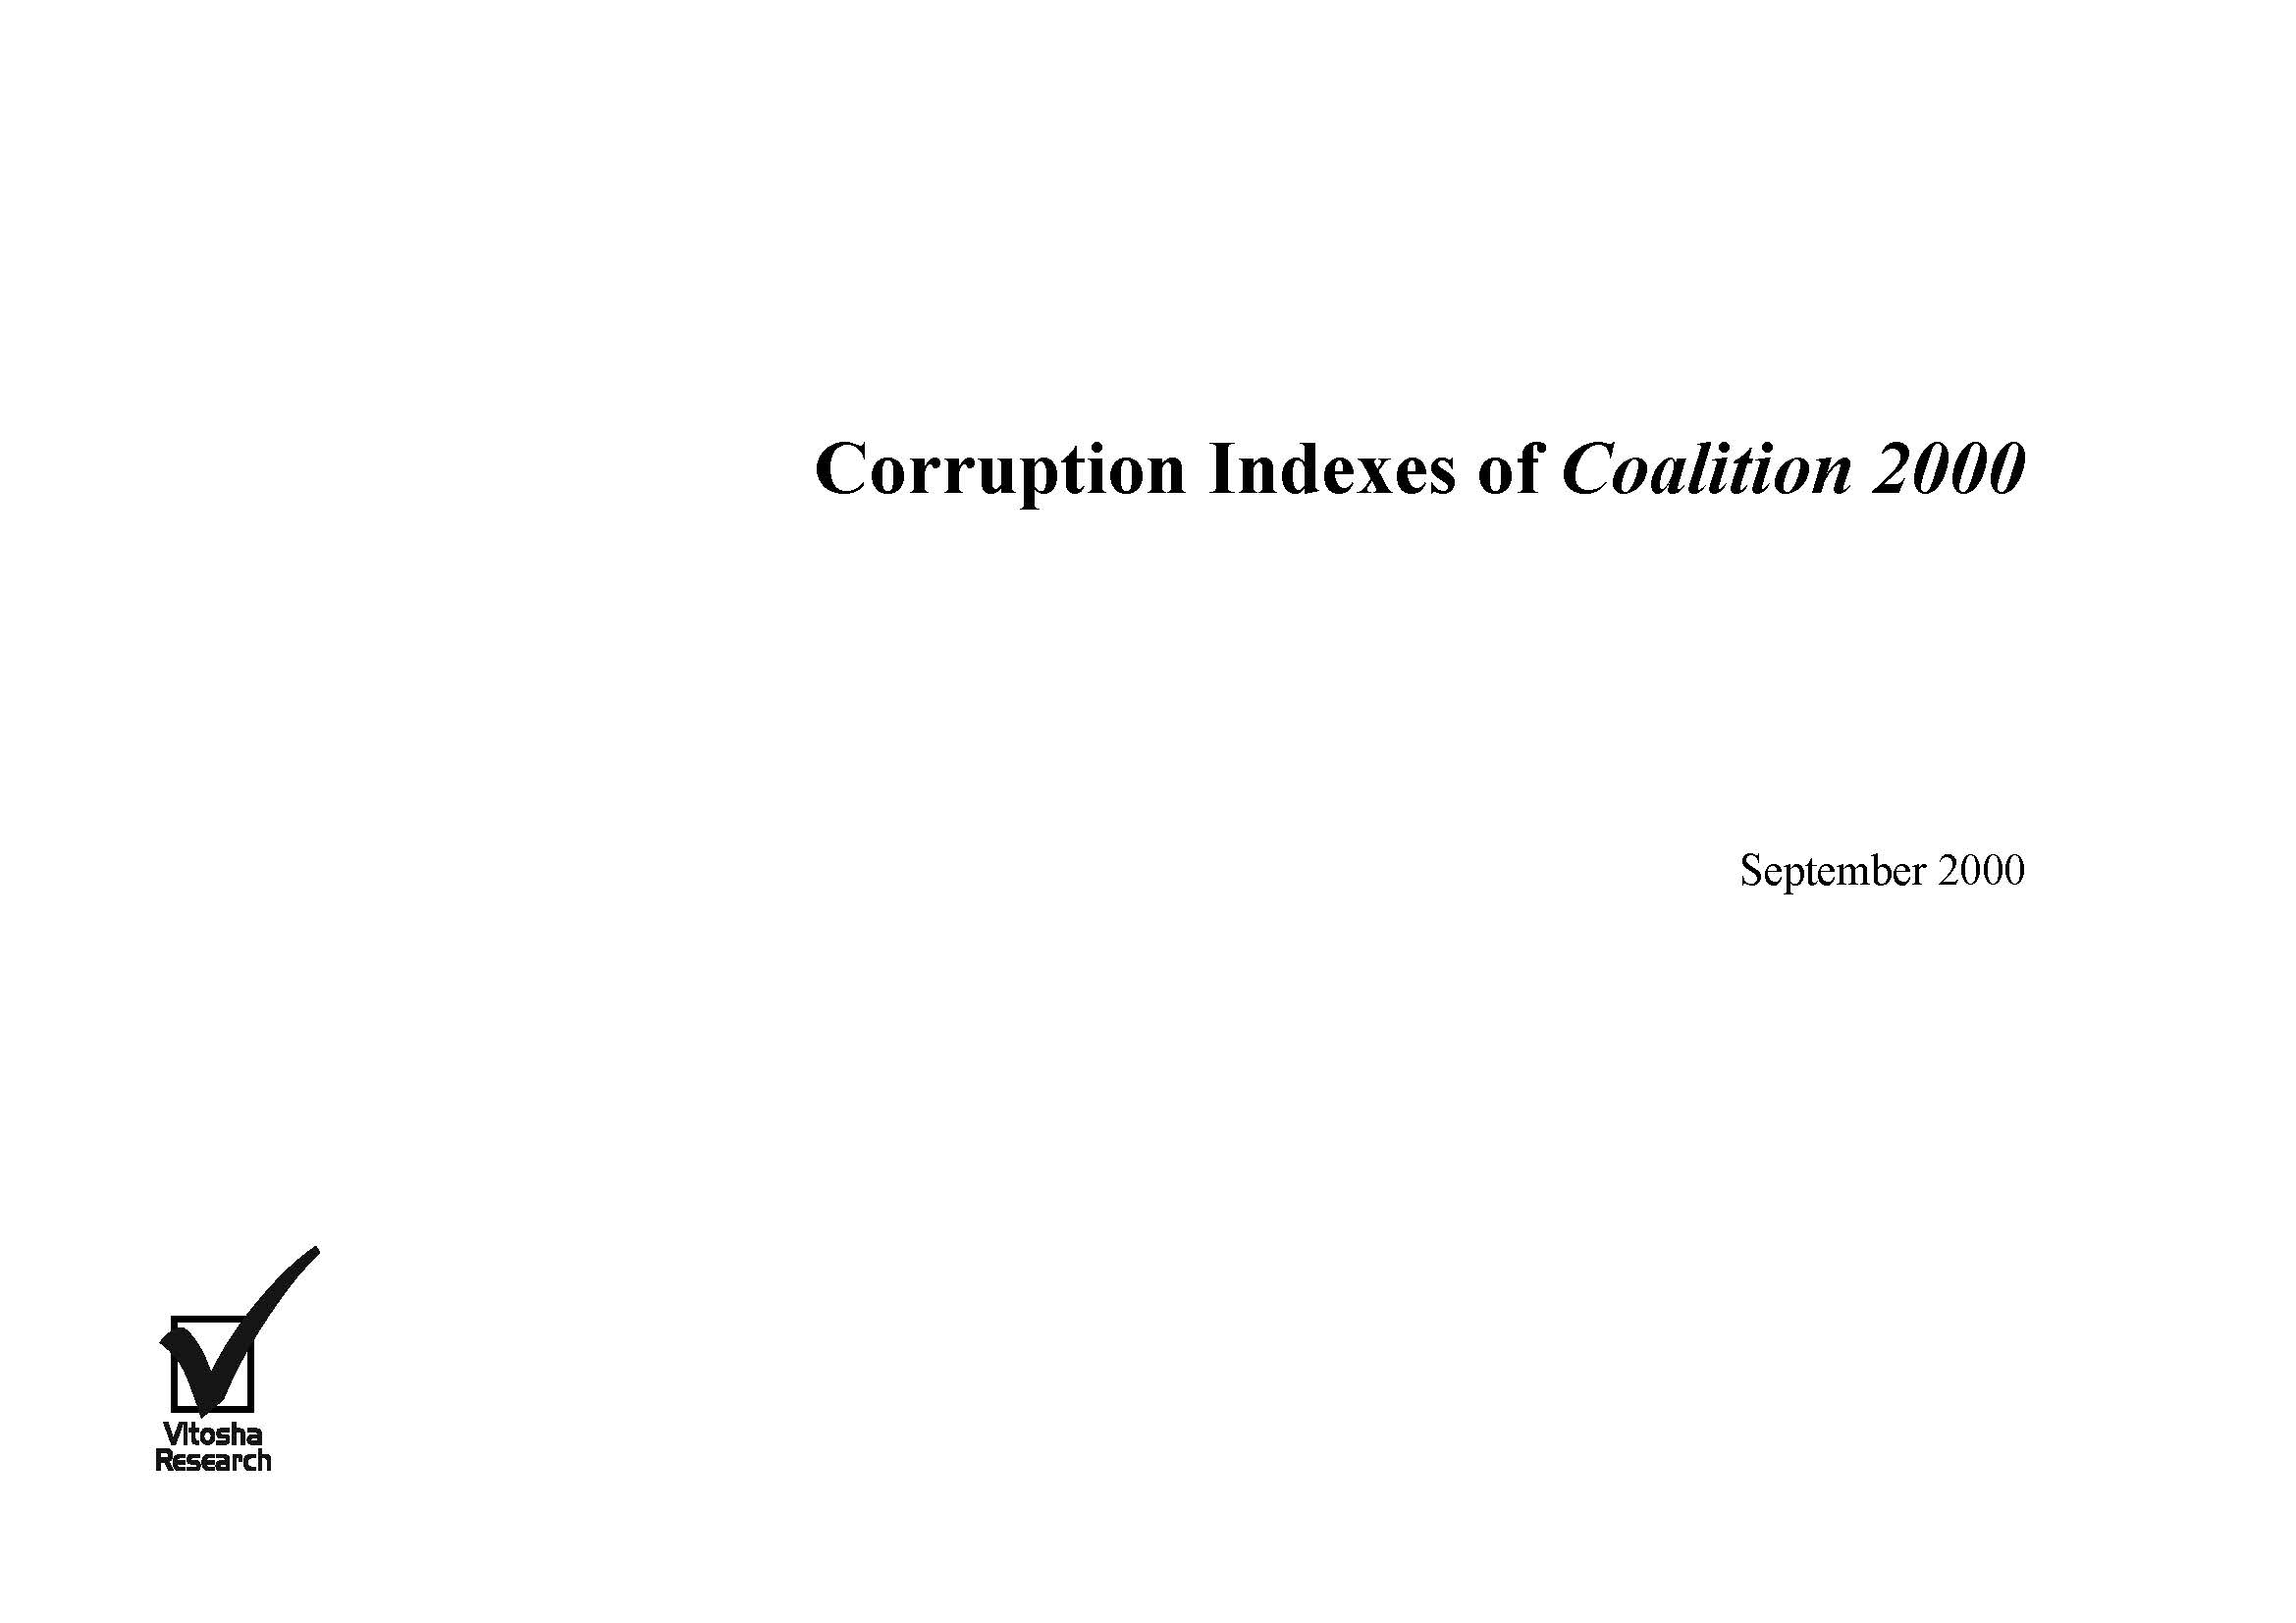 Corruption Indexes of Coalition 2000, September 2000